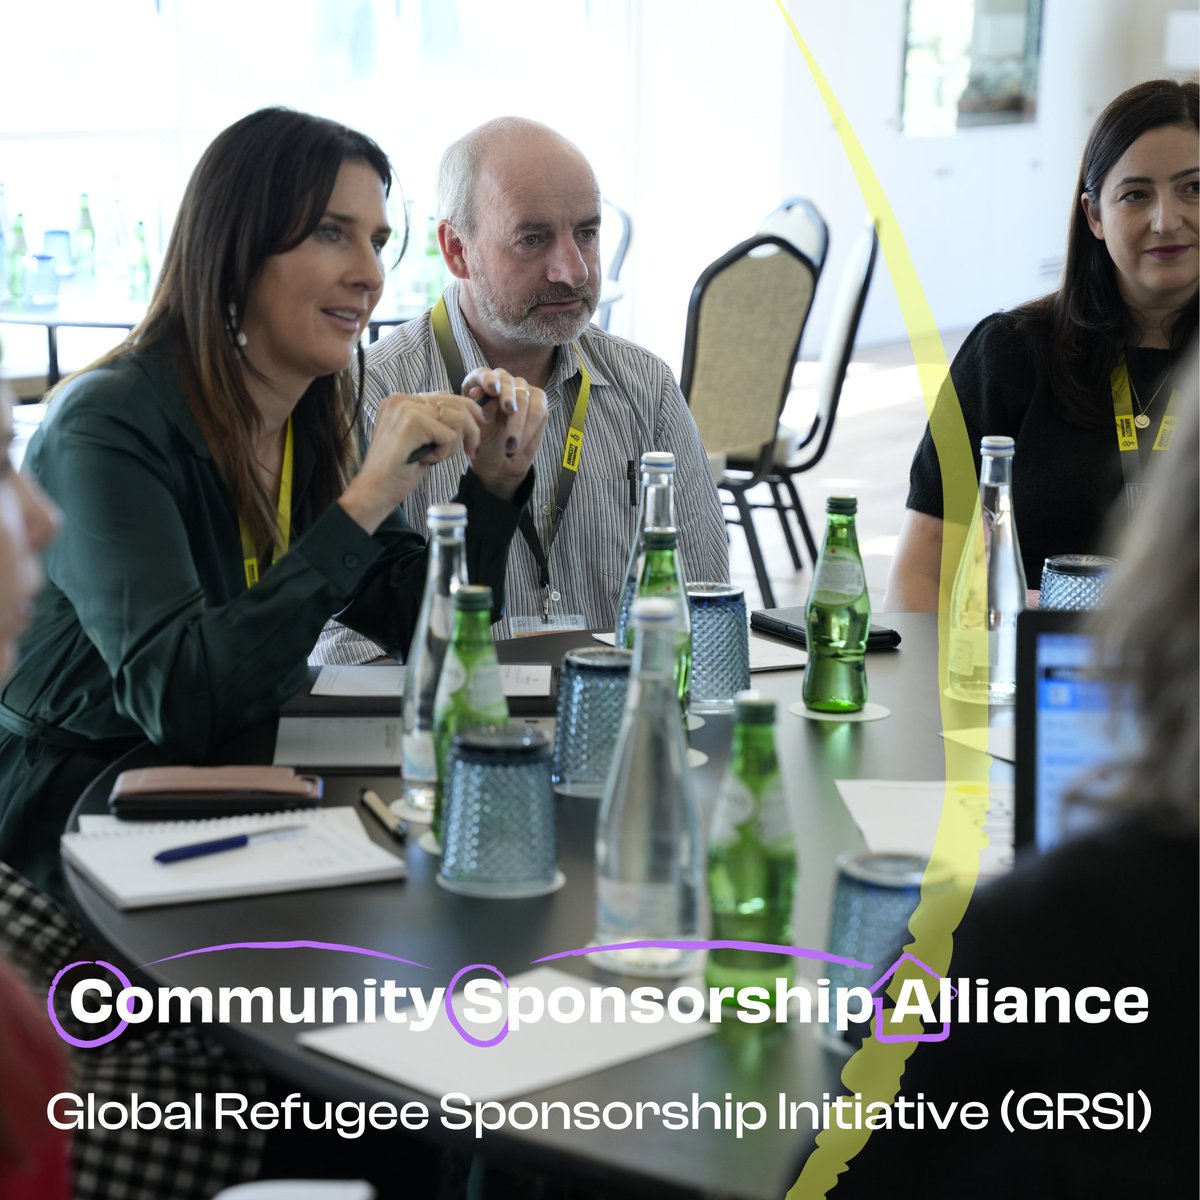 We were at the @theGRSI last week. Read all about it here 👇

linkedin.com/feed/update/ur…

#CommunitySponsorship #CommunitySponsorshipAlliance